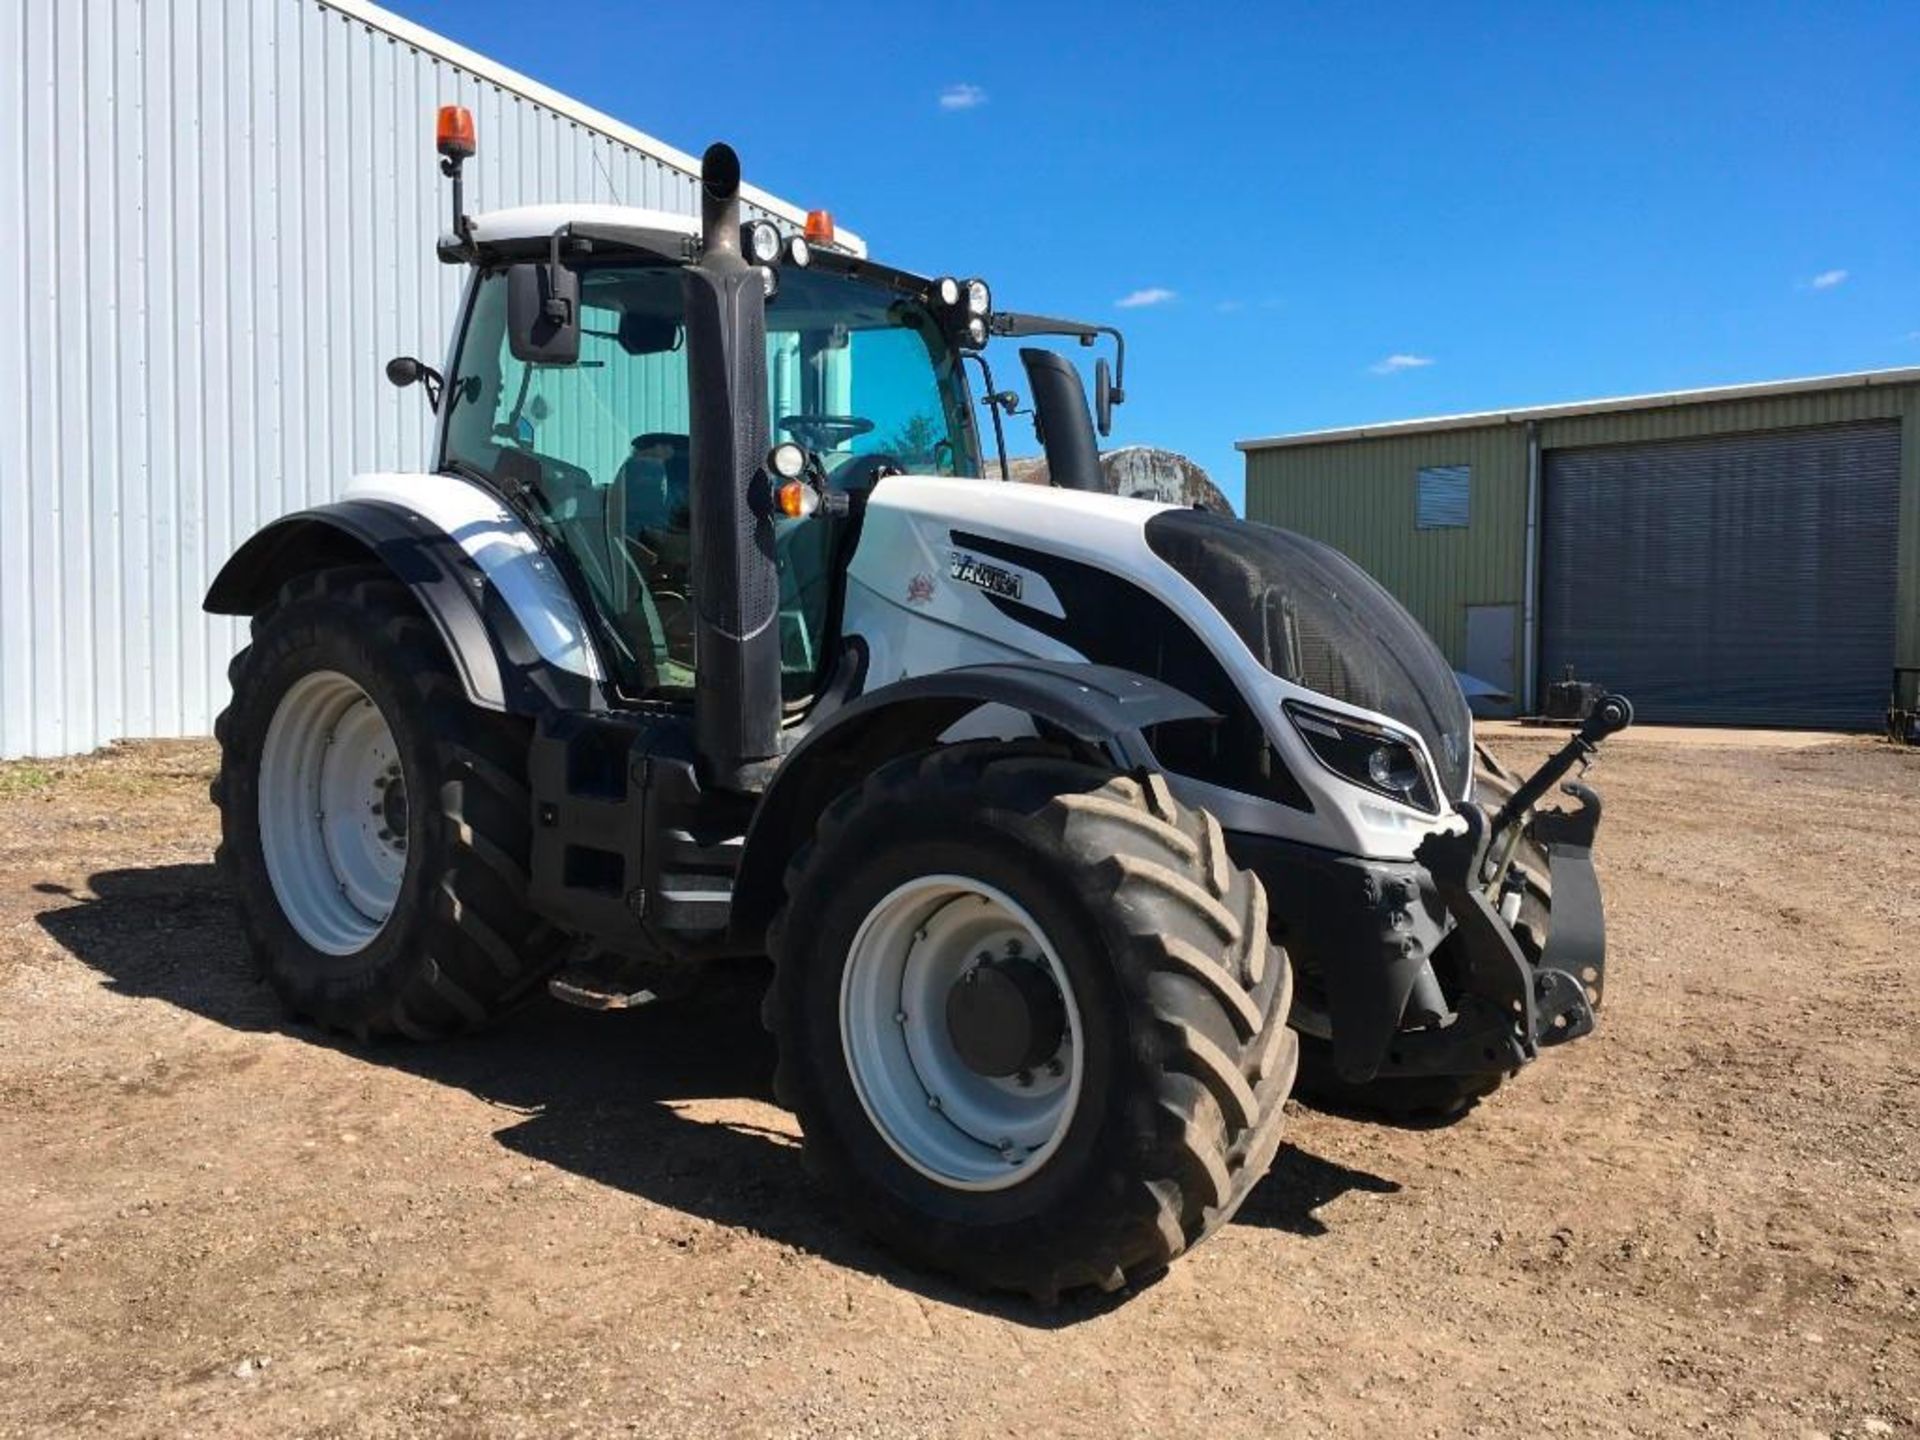 2015 Valtra T174 Versu 50kph tractor, powershift transmission, air suspension, 2 front and 4 rear sp - Image 9 of 15